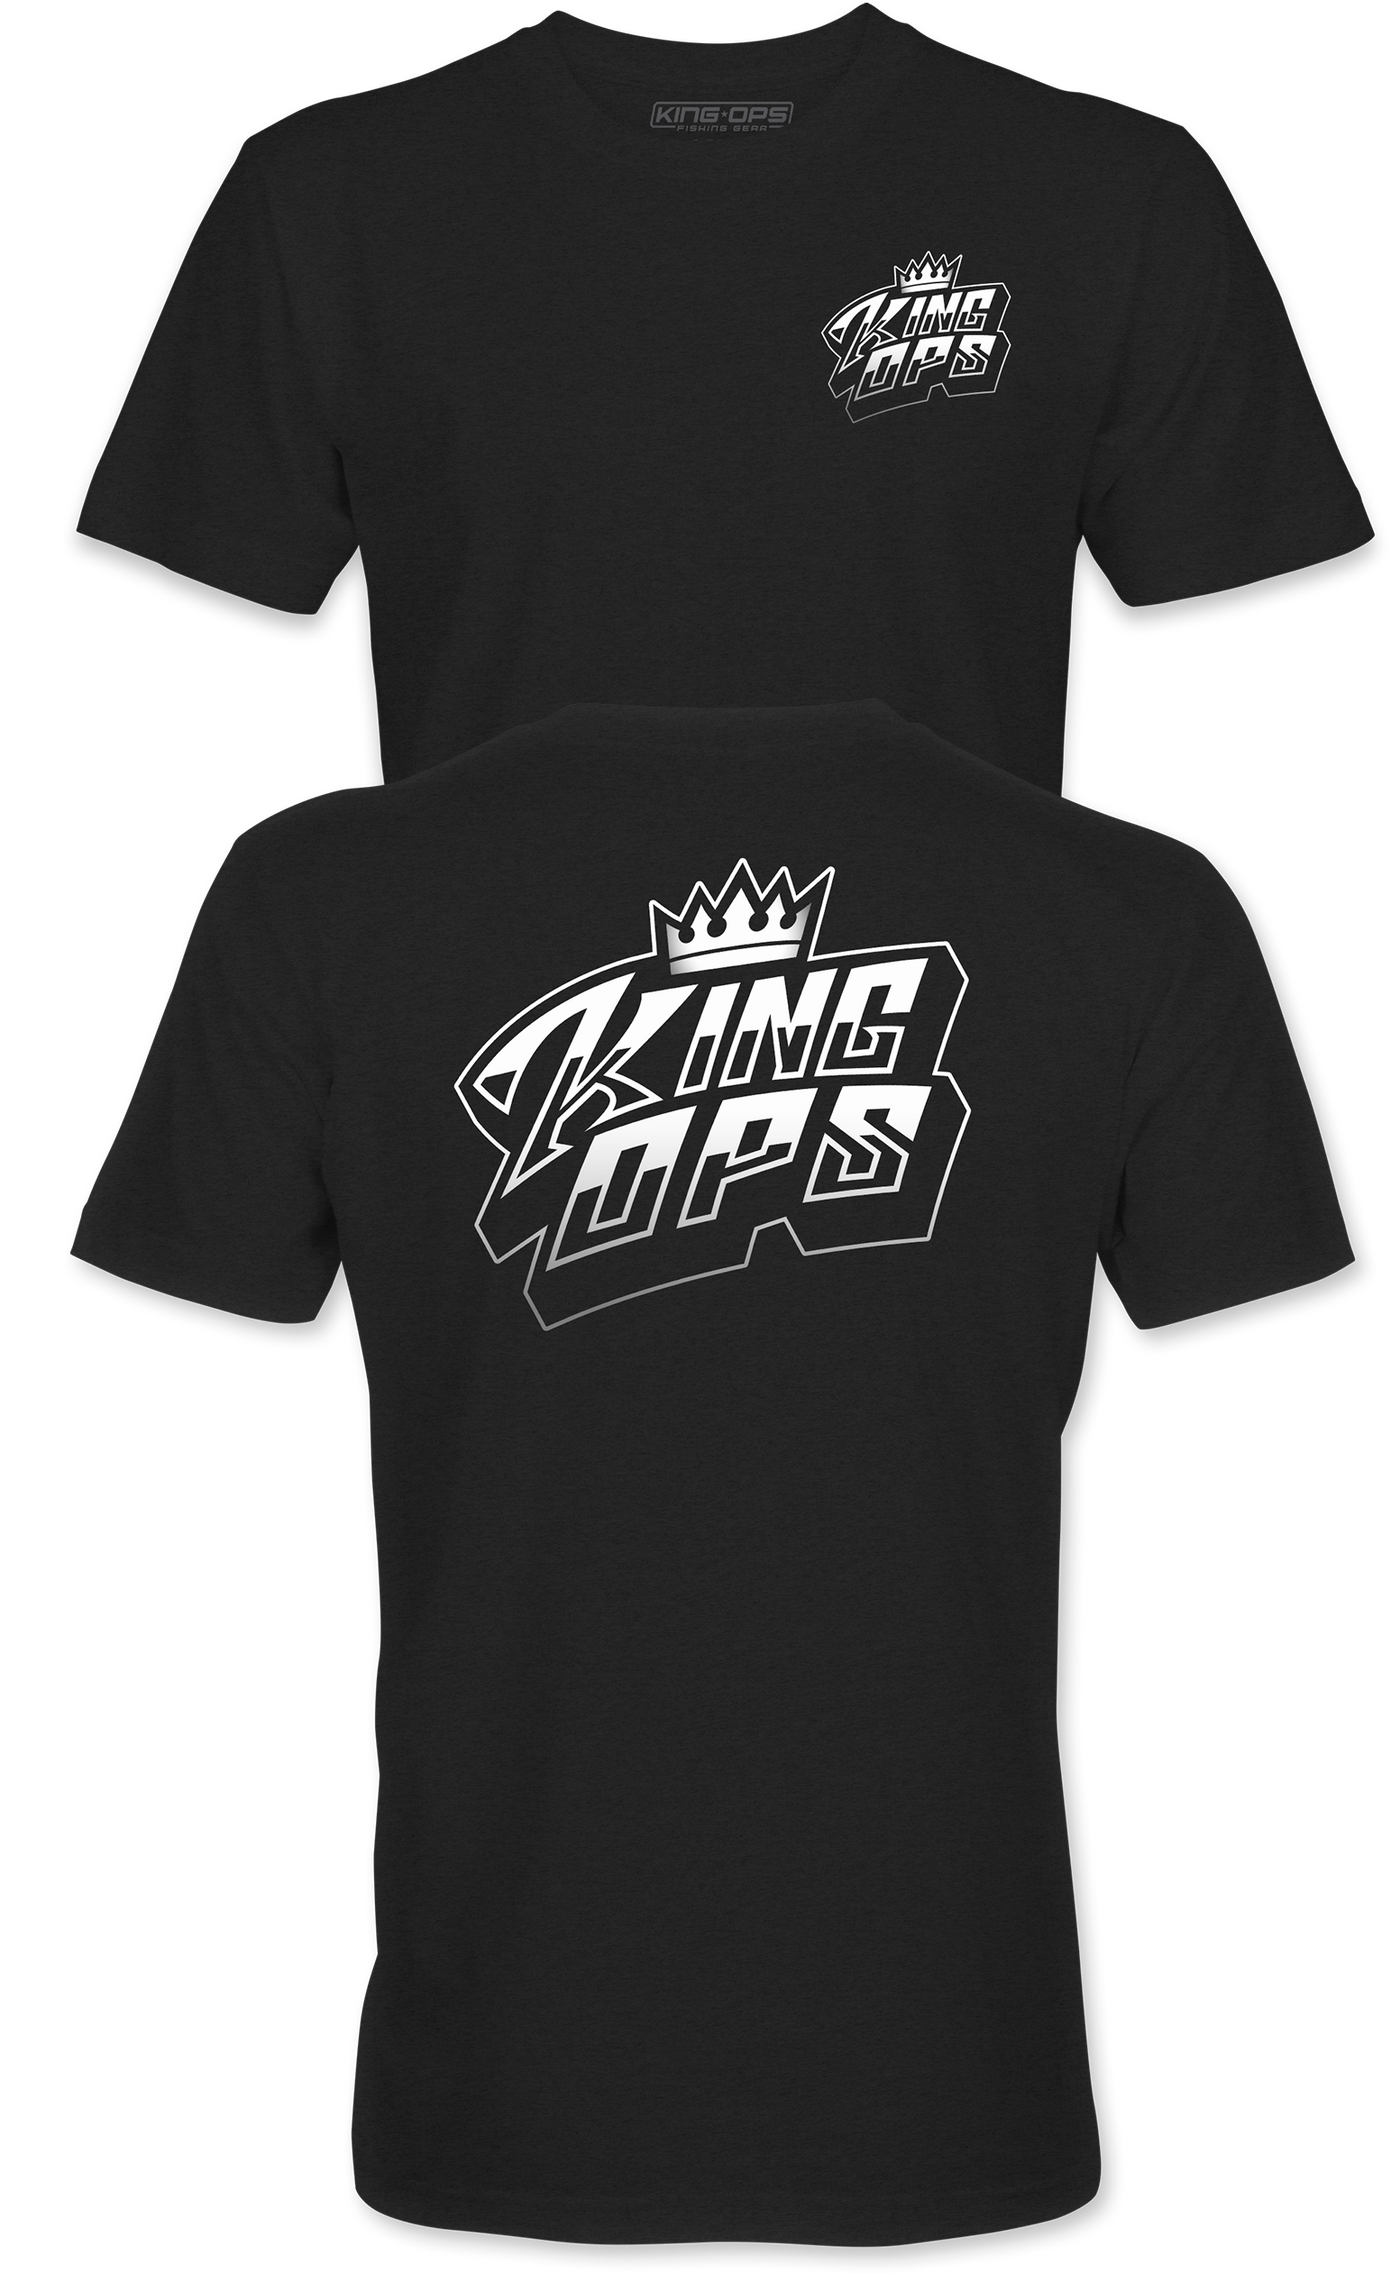 MEN'S KING OPS CROWN T-SHIRT - X-SMALL / CHARCOAL